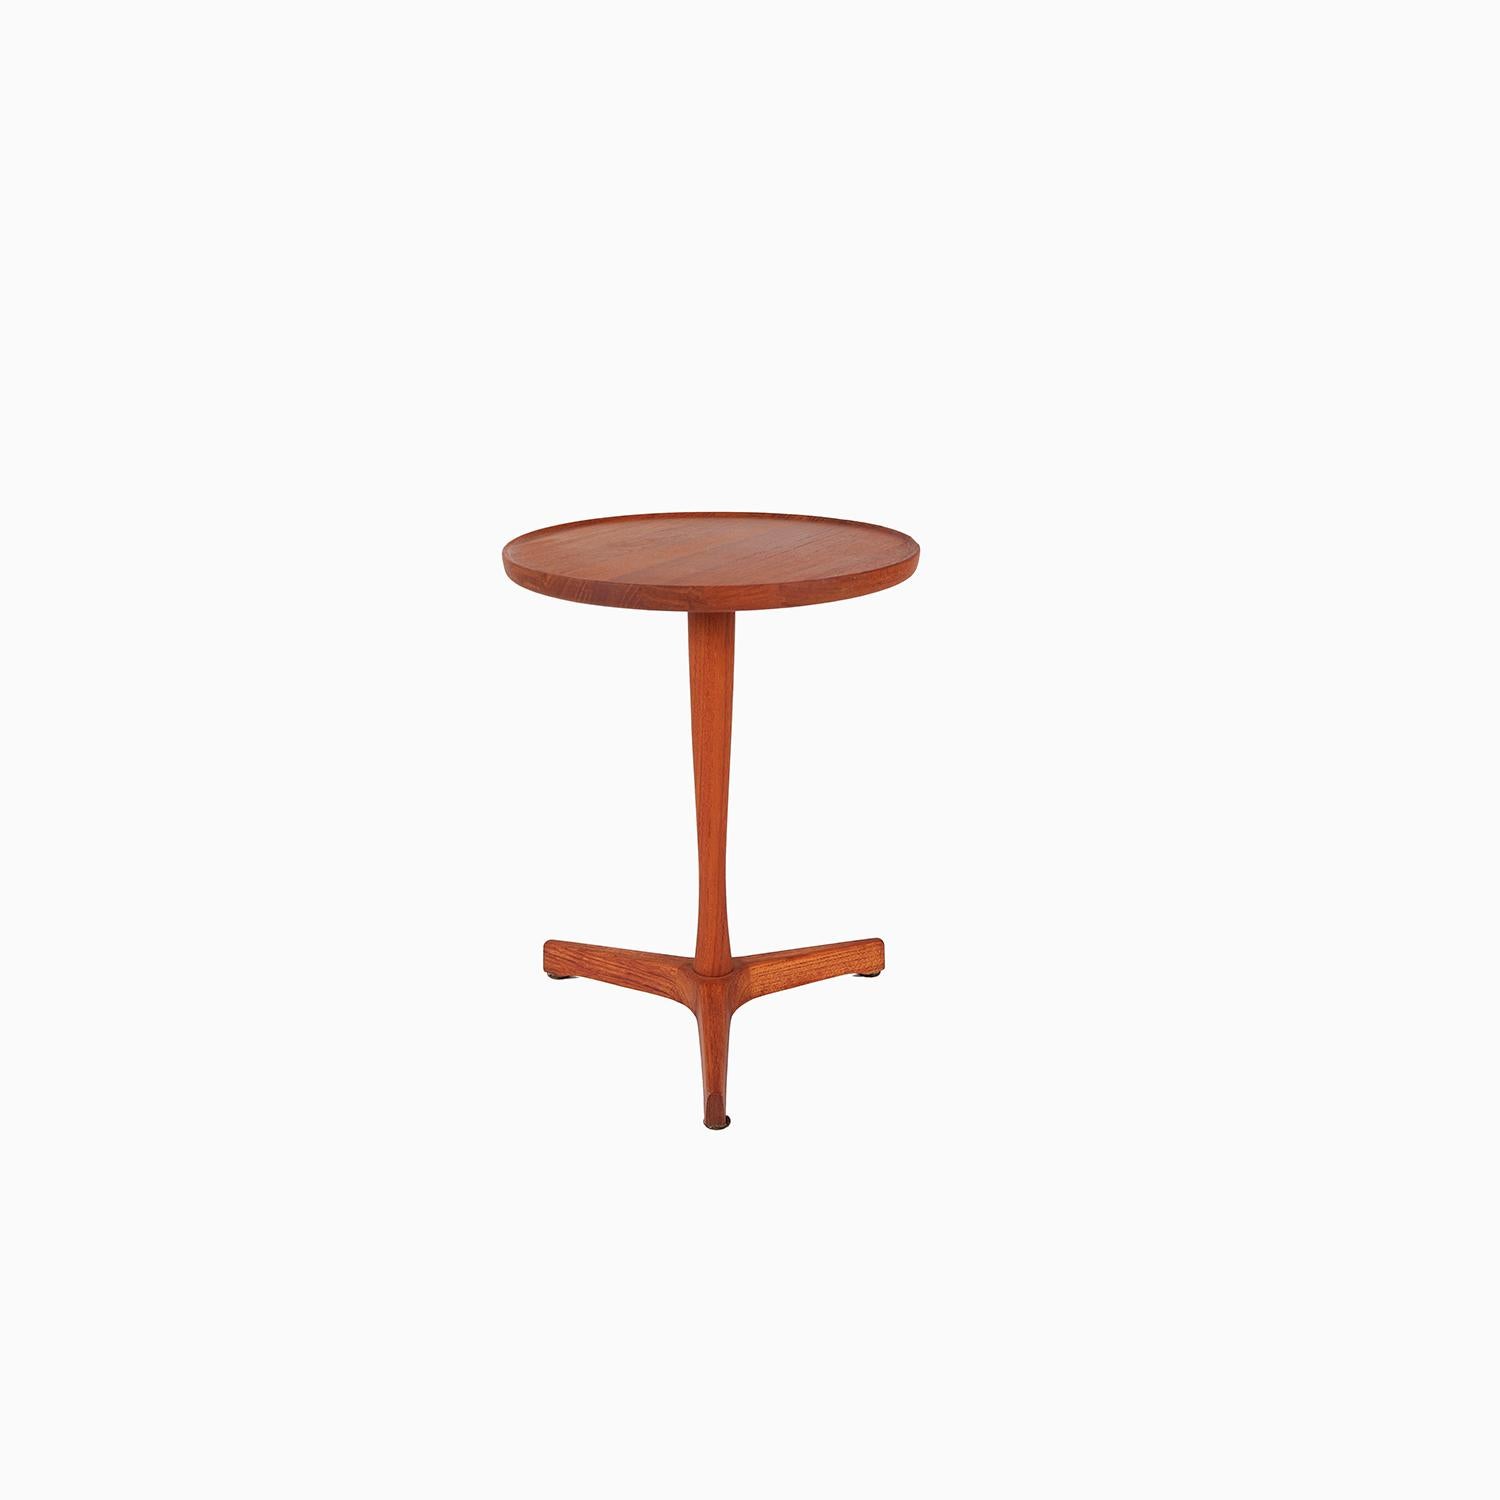 The perfect companion piece to your favorite lounge. An attractive and light weight pedestal side table constructed in solid teak. Solid teak top with just a subtle dish to the edge and nicely executed exposed joinery.

Professional, skilled